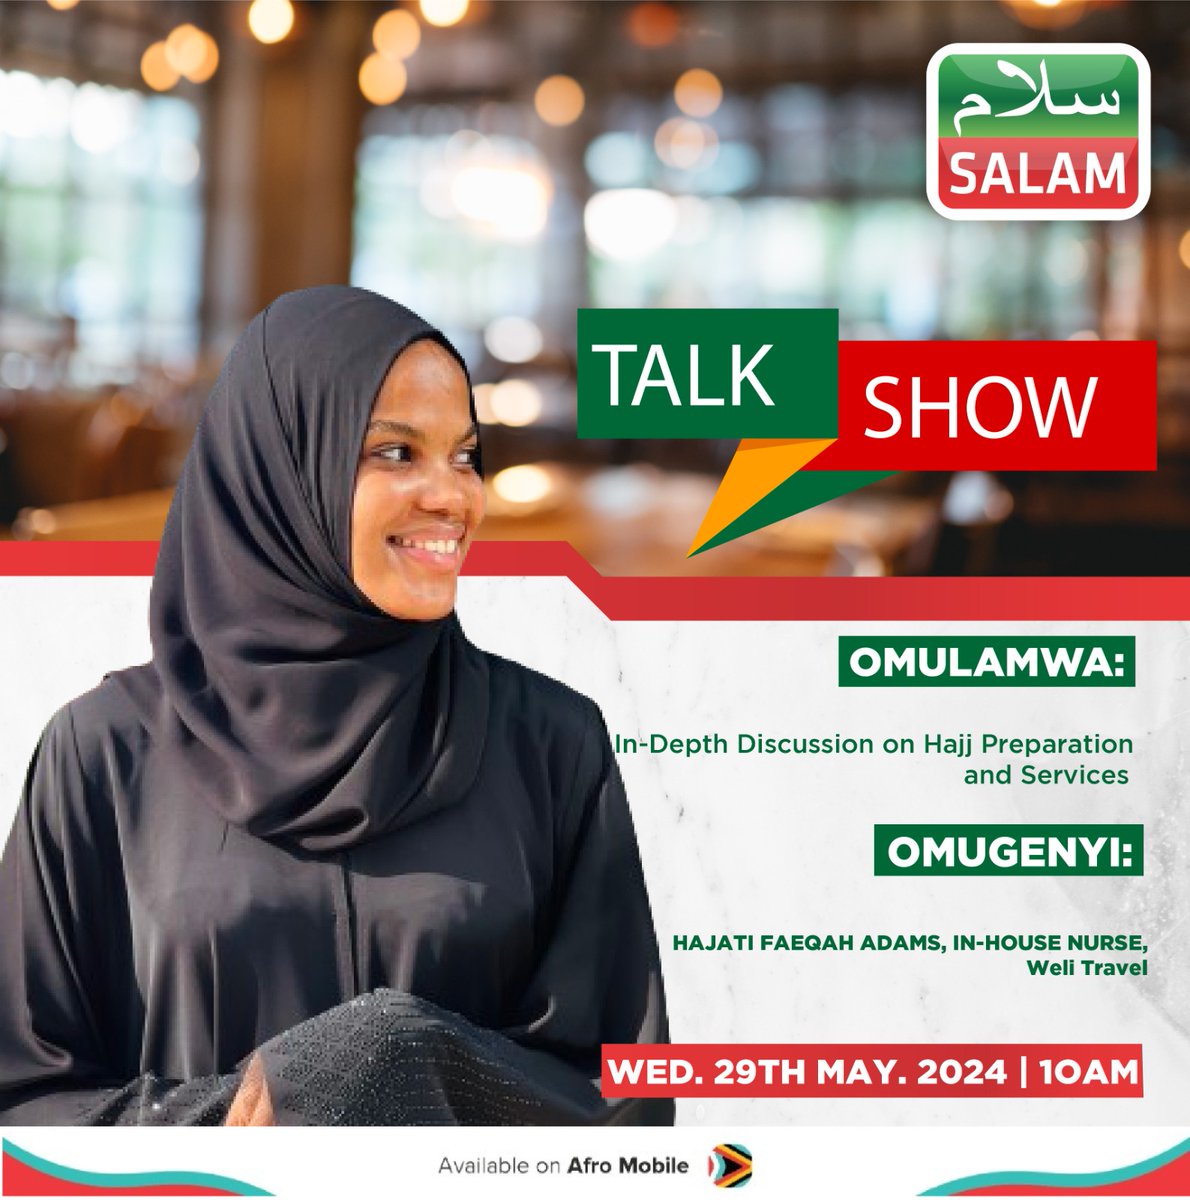 Tune in to @SalamTvUG tomorrow at 10 am for #SalamBreakfastMeeting with Sheikh Didat Kakooza, Head of Hajj & Umrah at Weli Travel, & Hajati Faeqah Adams, In-House Nurse at @welitravel, for a discussion on Hajj preparation and services. #SalamUpdates